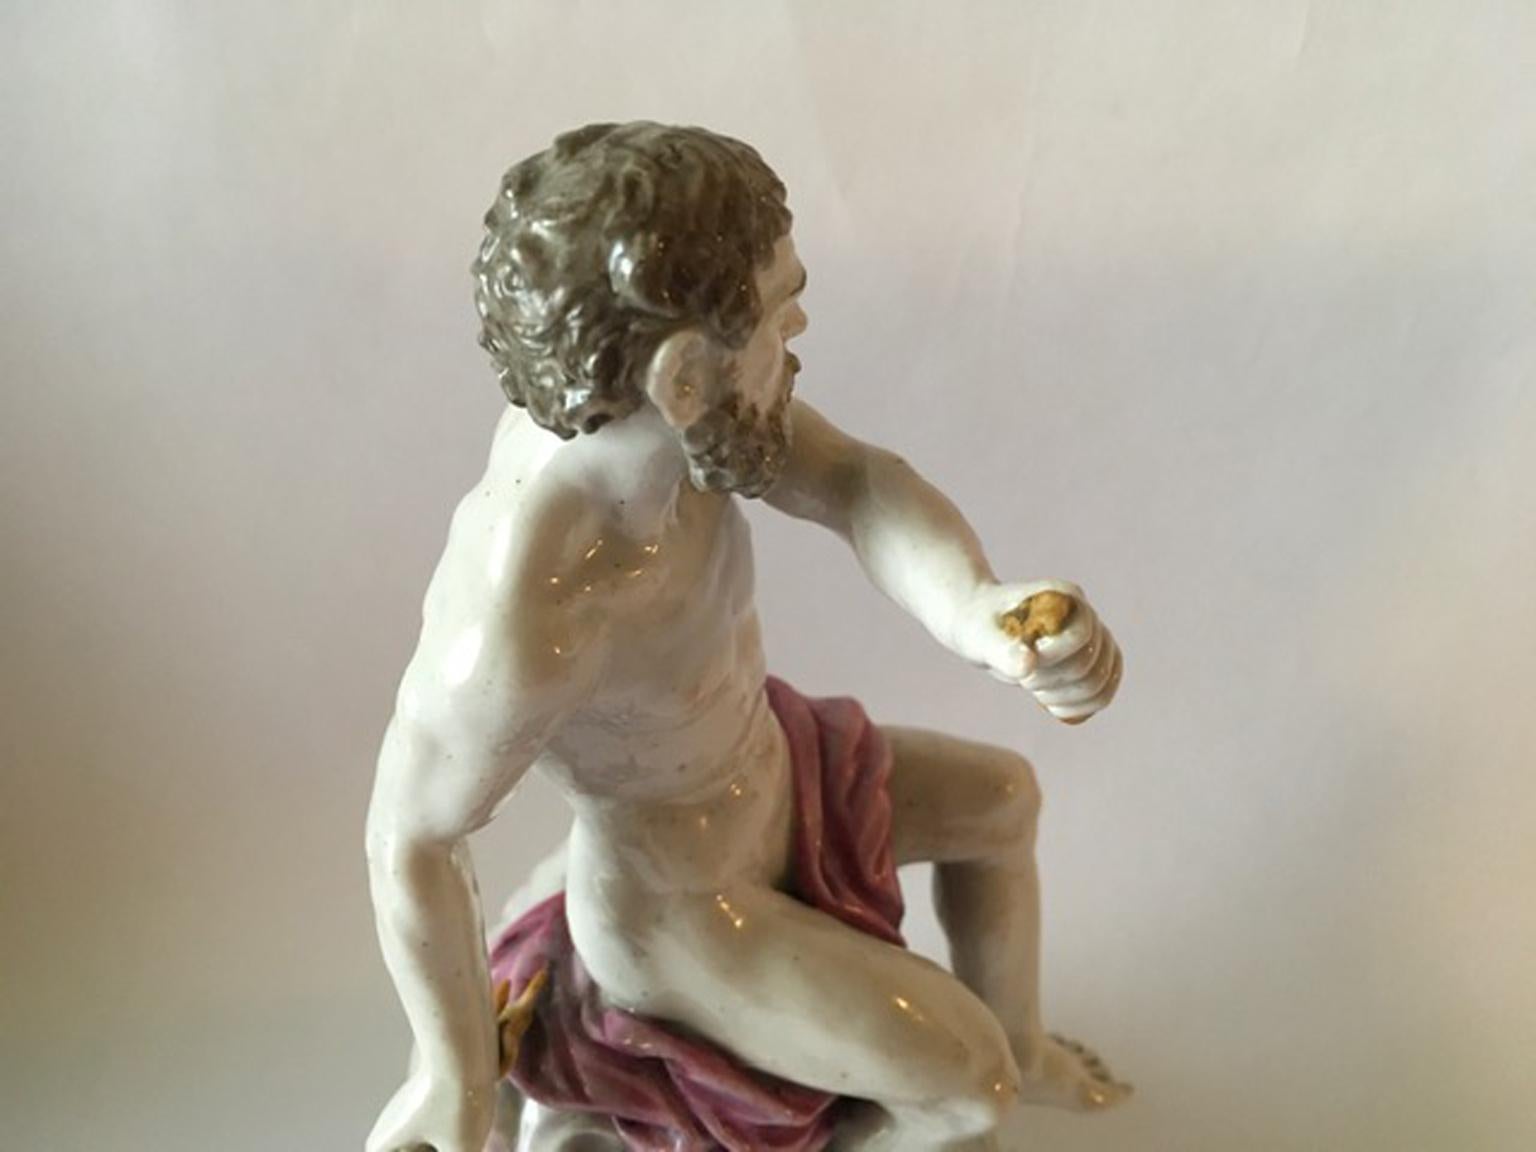 Europe 18th Century Attribuited to Meissen Porcelain Giove Figurine For Sale 6